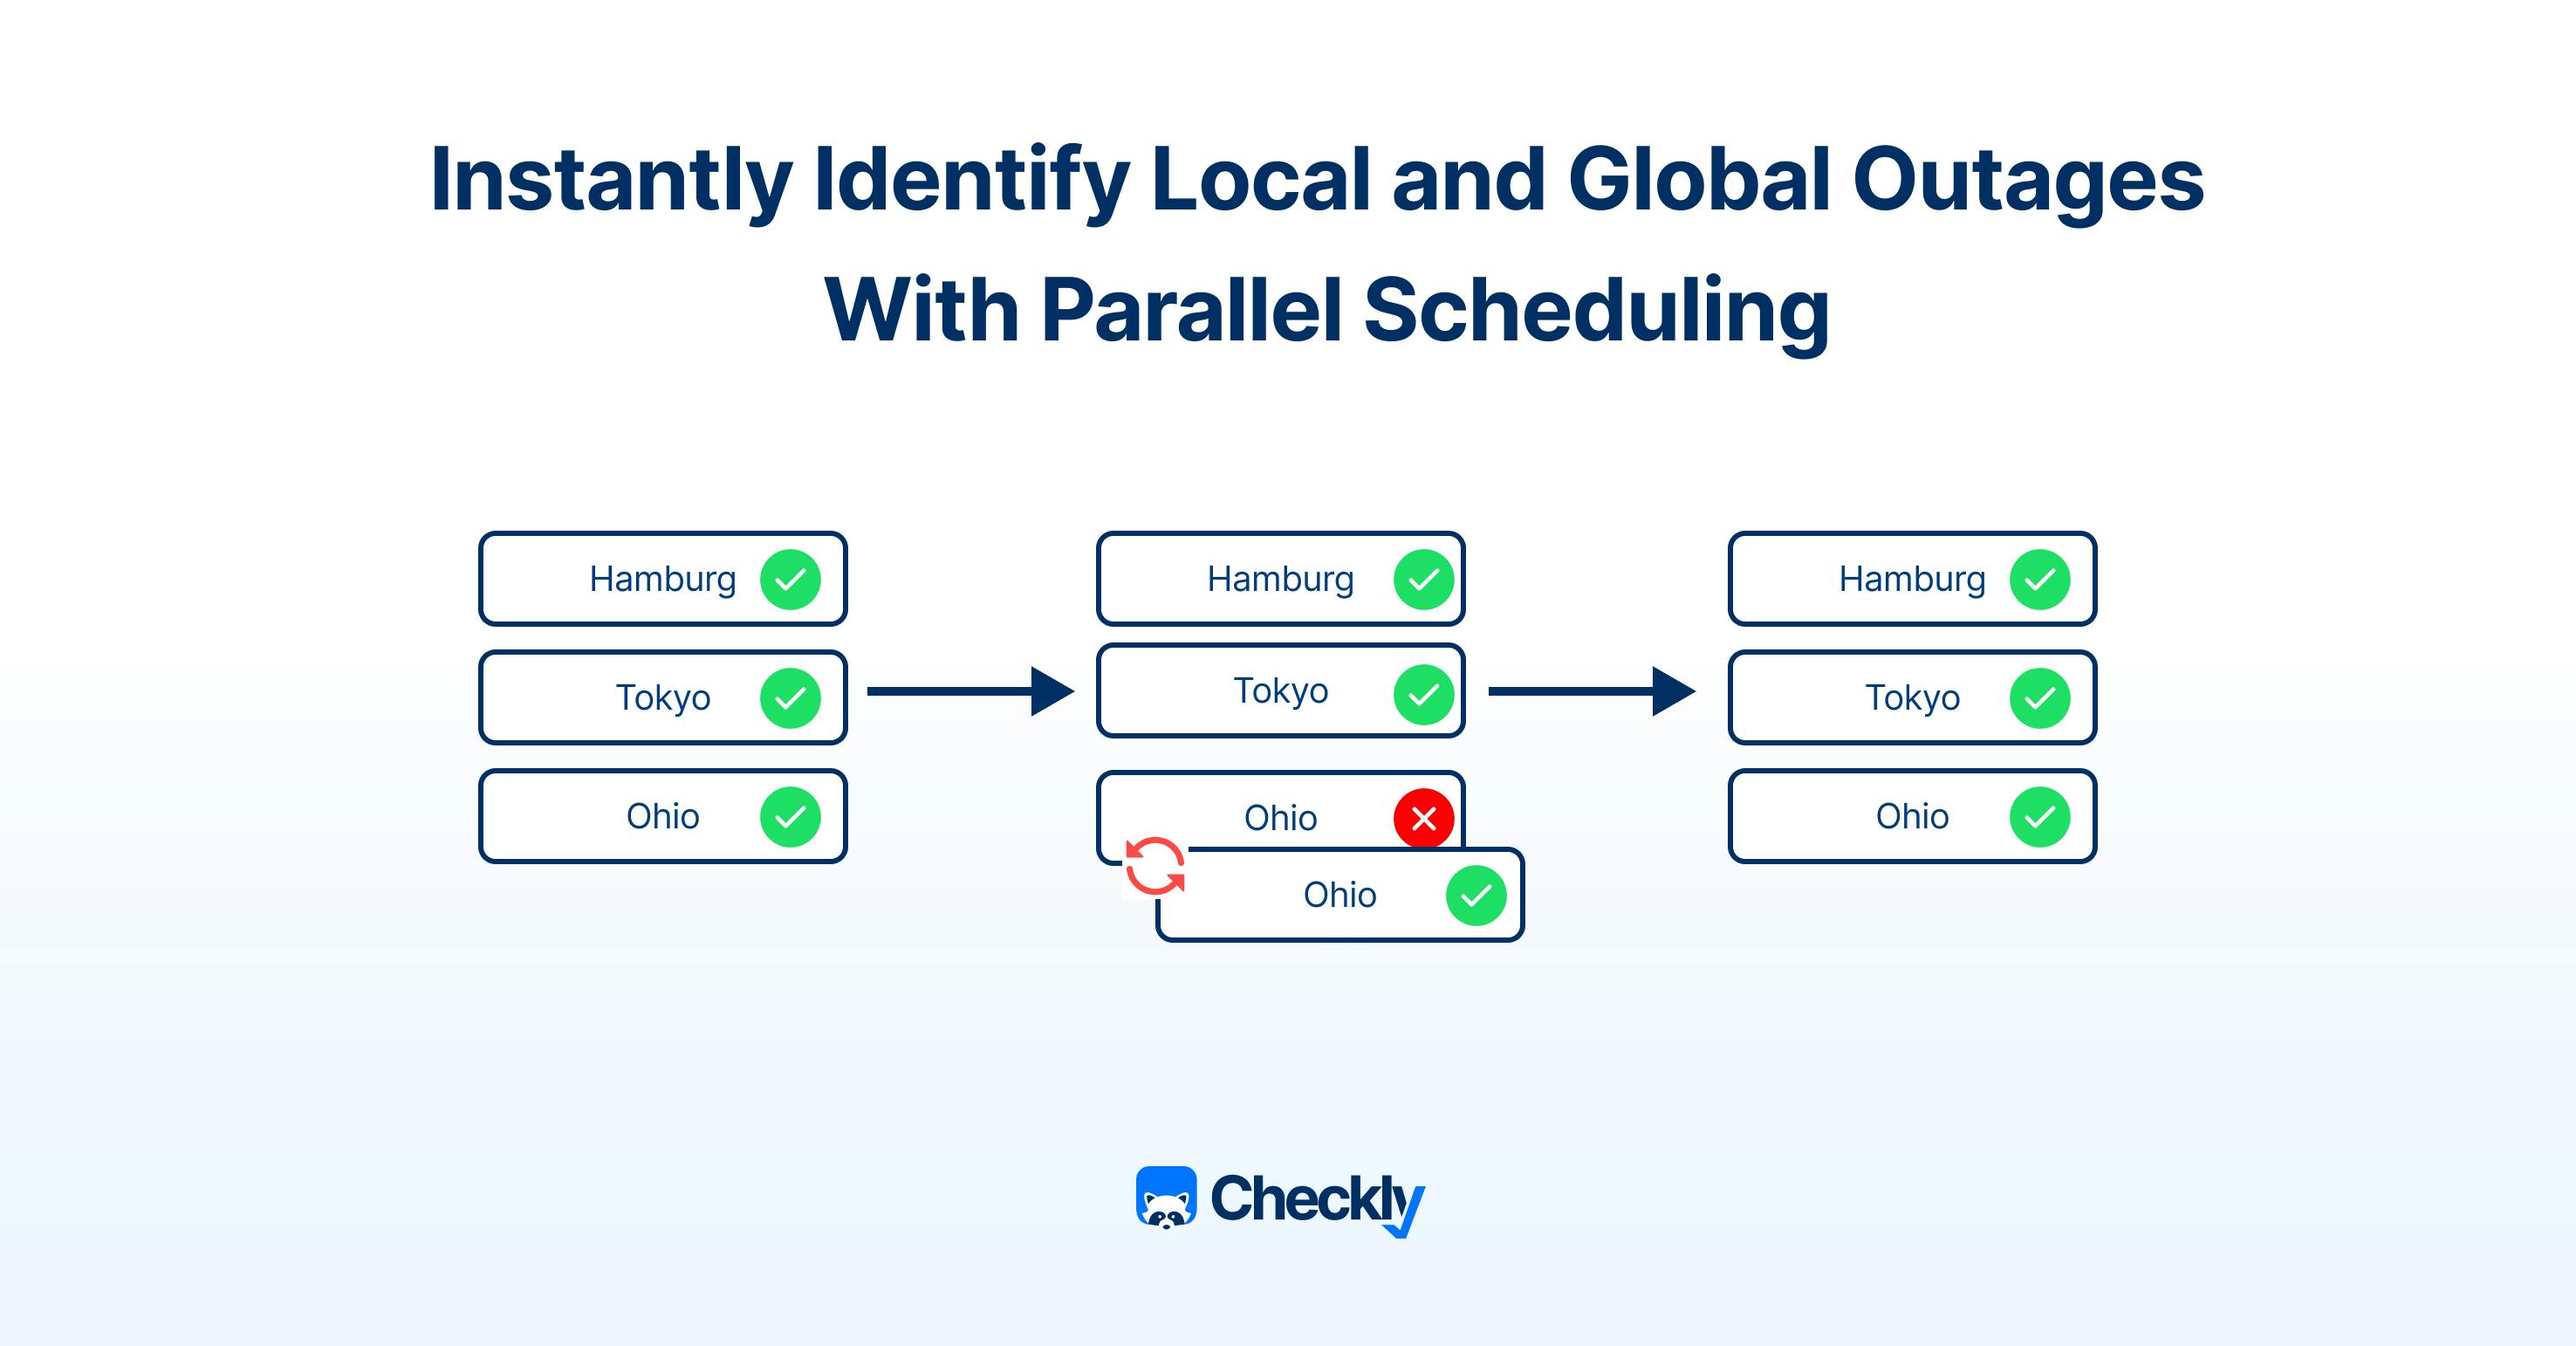 Illustration explaining how to identify local and global outages with parallel scheduling